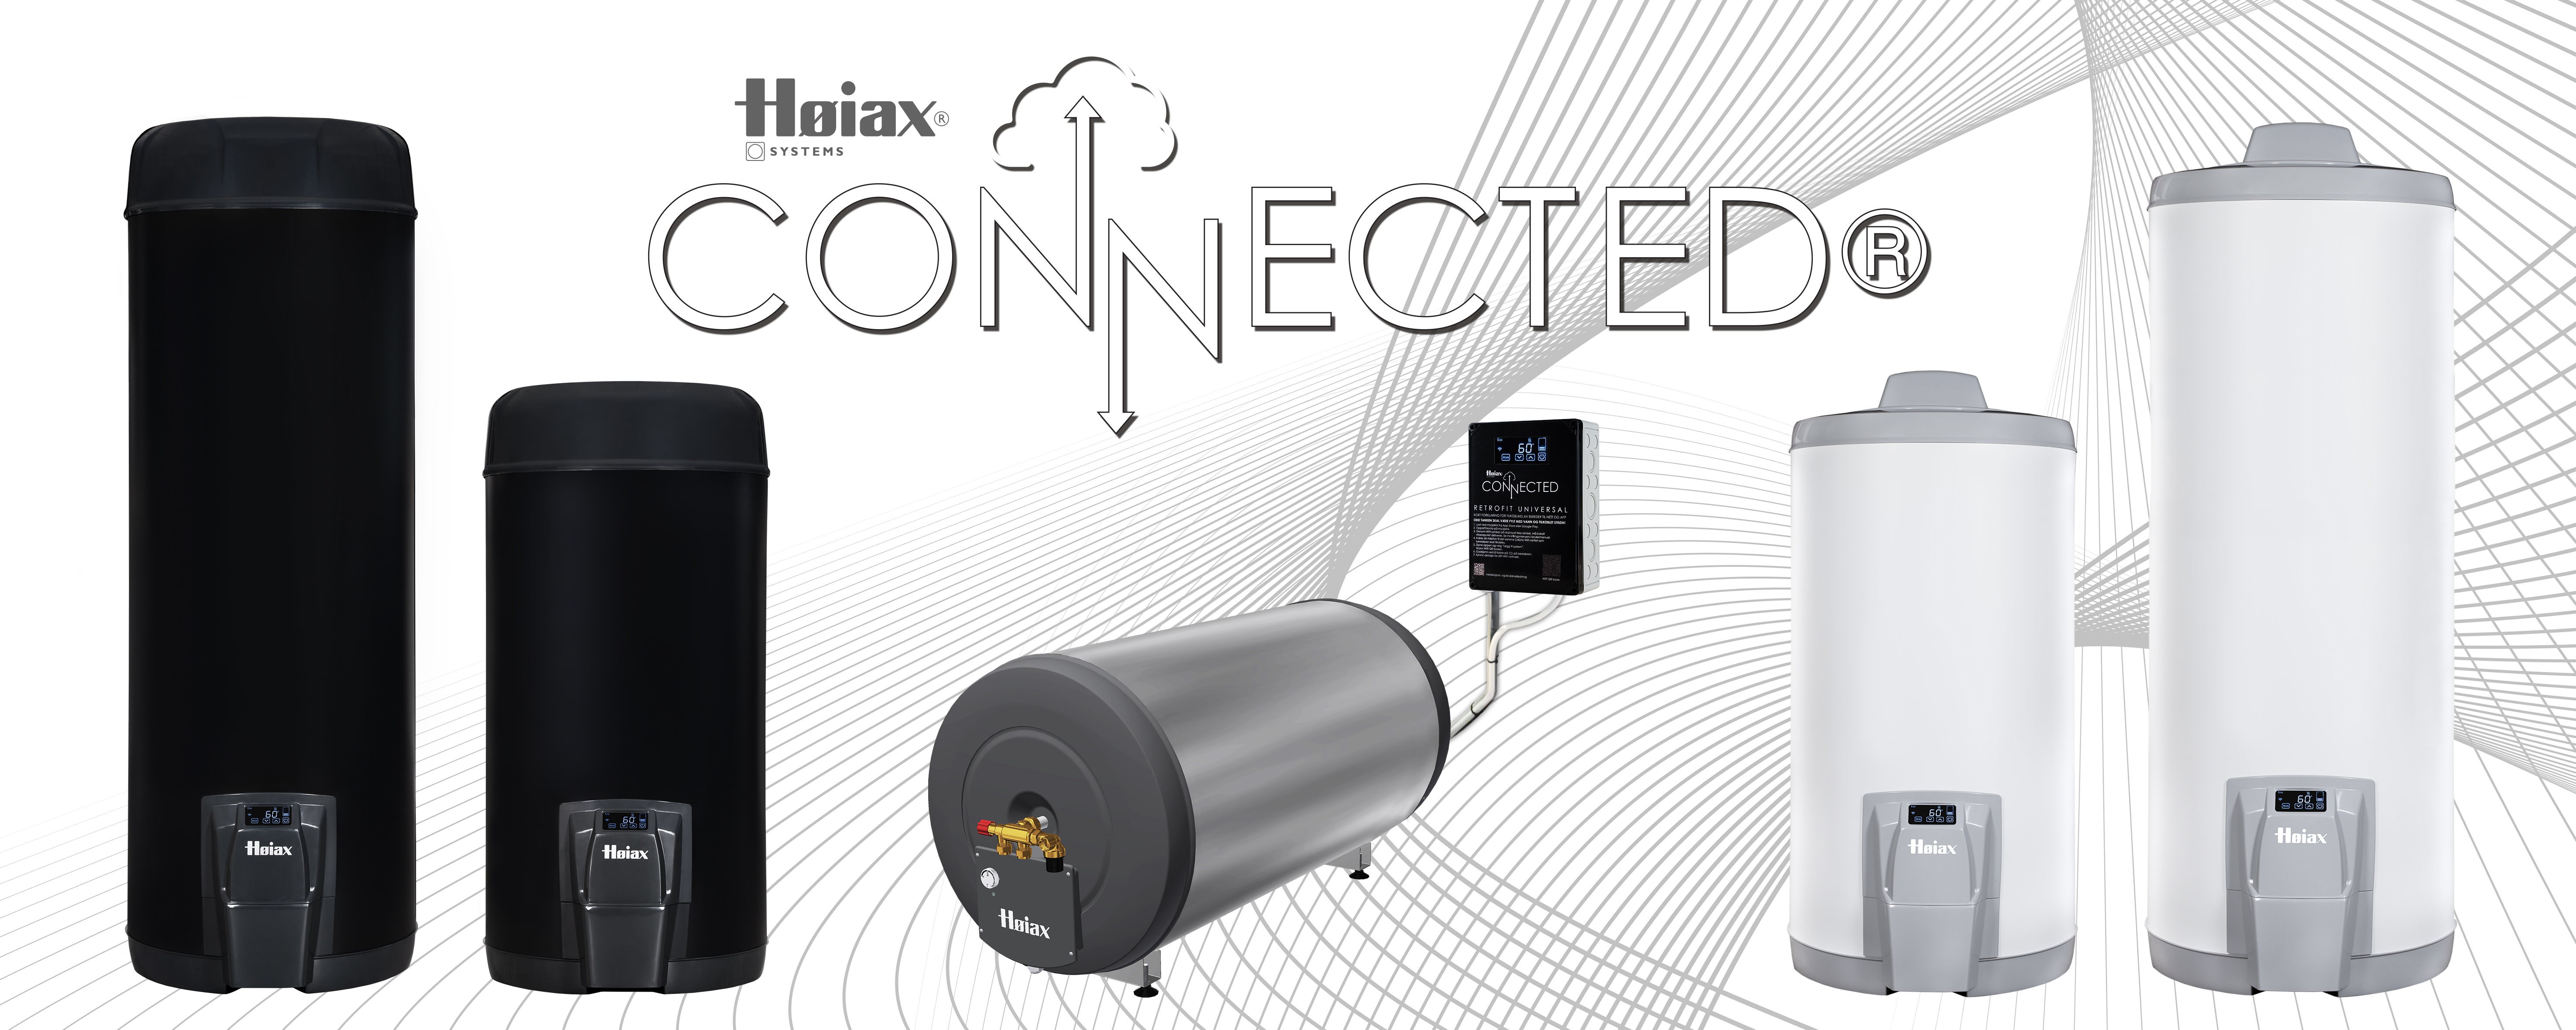 Høiax Connected 200